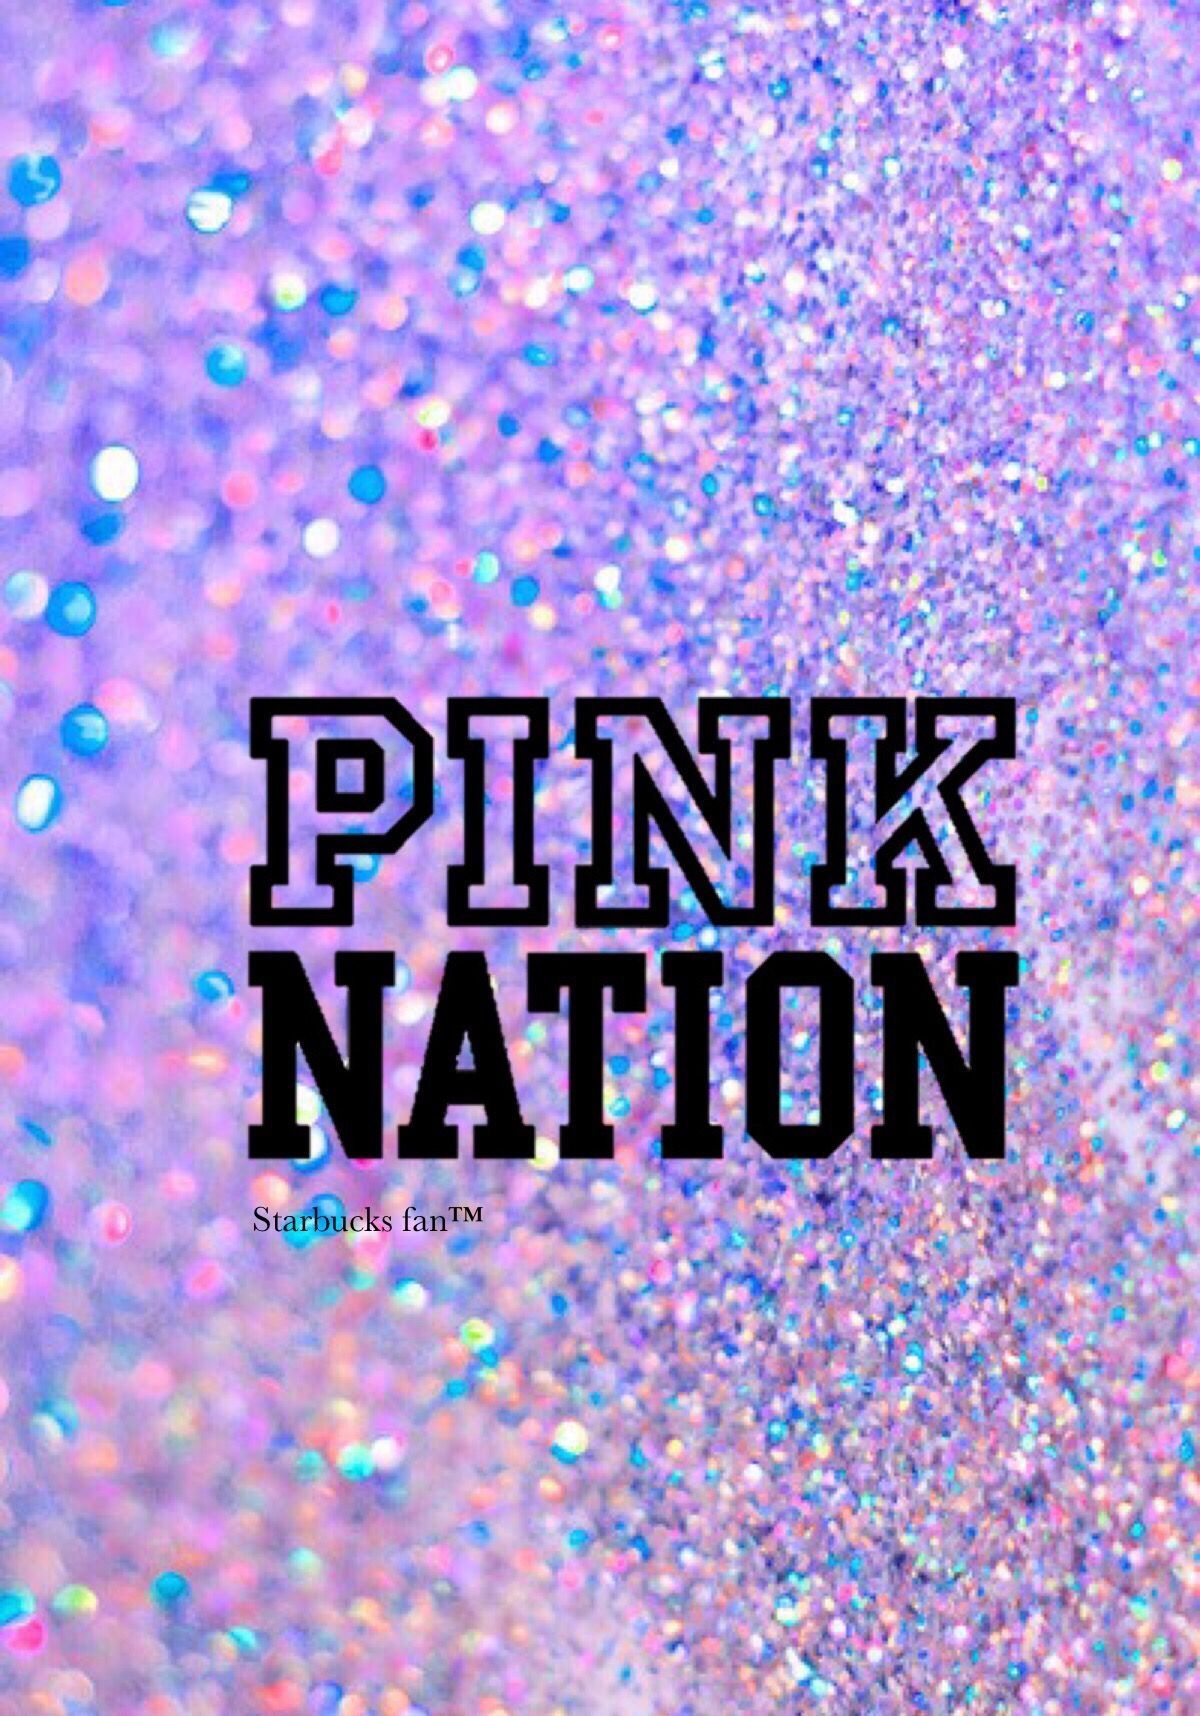 Pink Nation Wallpapers - Wallpaper Cave